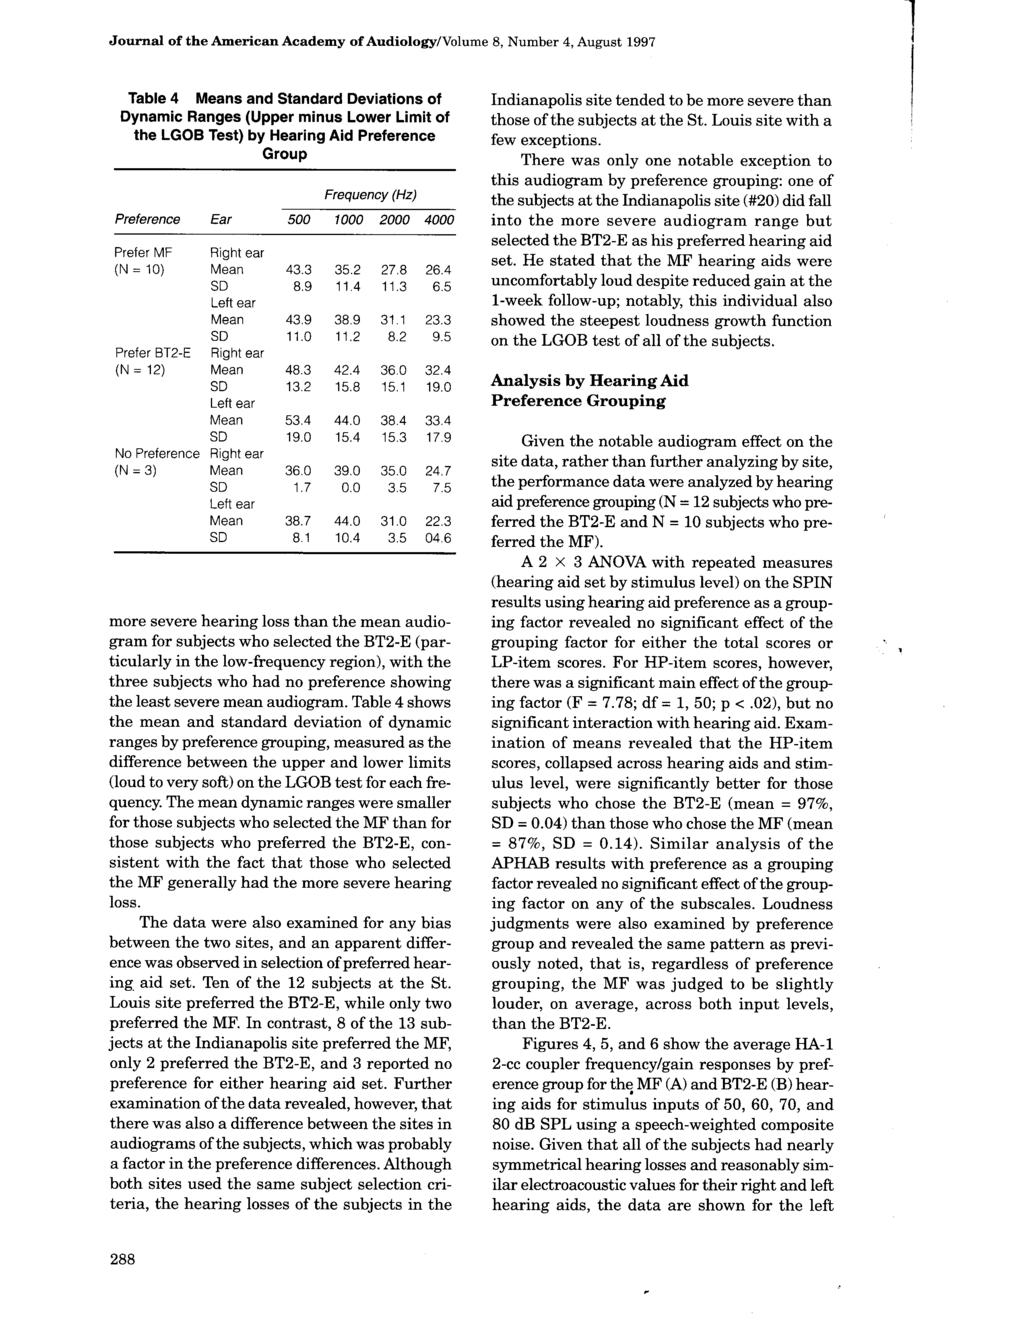 Journal of the American Academy of Audiology/Volume 8, Number 4, August 1997 Table 4 Means and Standard Deviations of Dynamic Ranges (Upper minus Lower Limit of the LGOB Test) by Hearing Aid